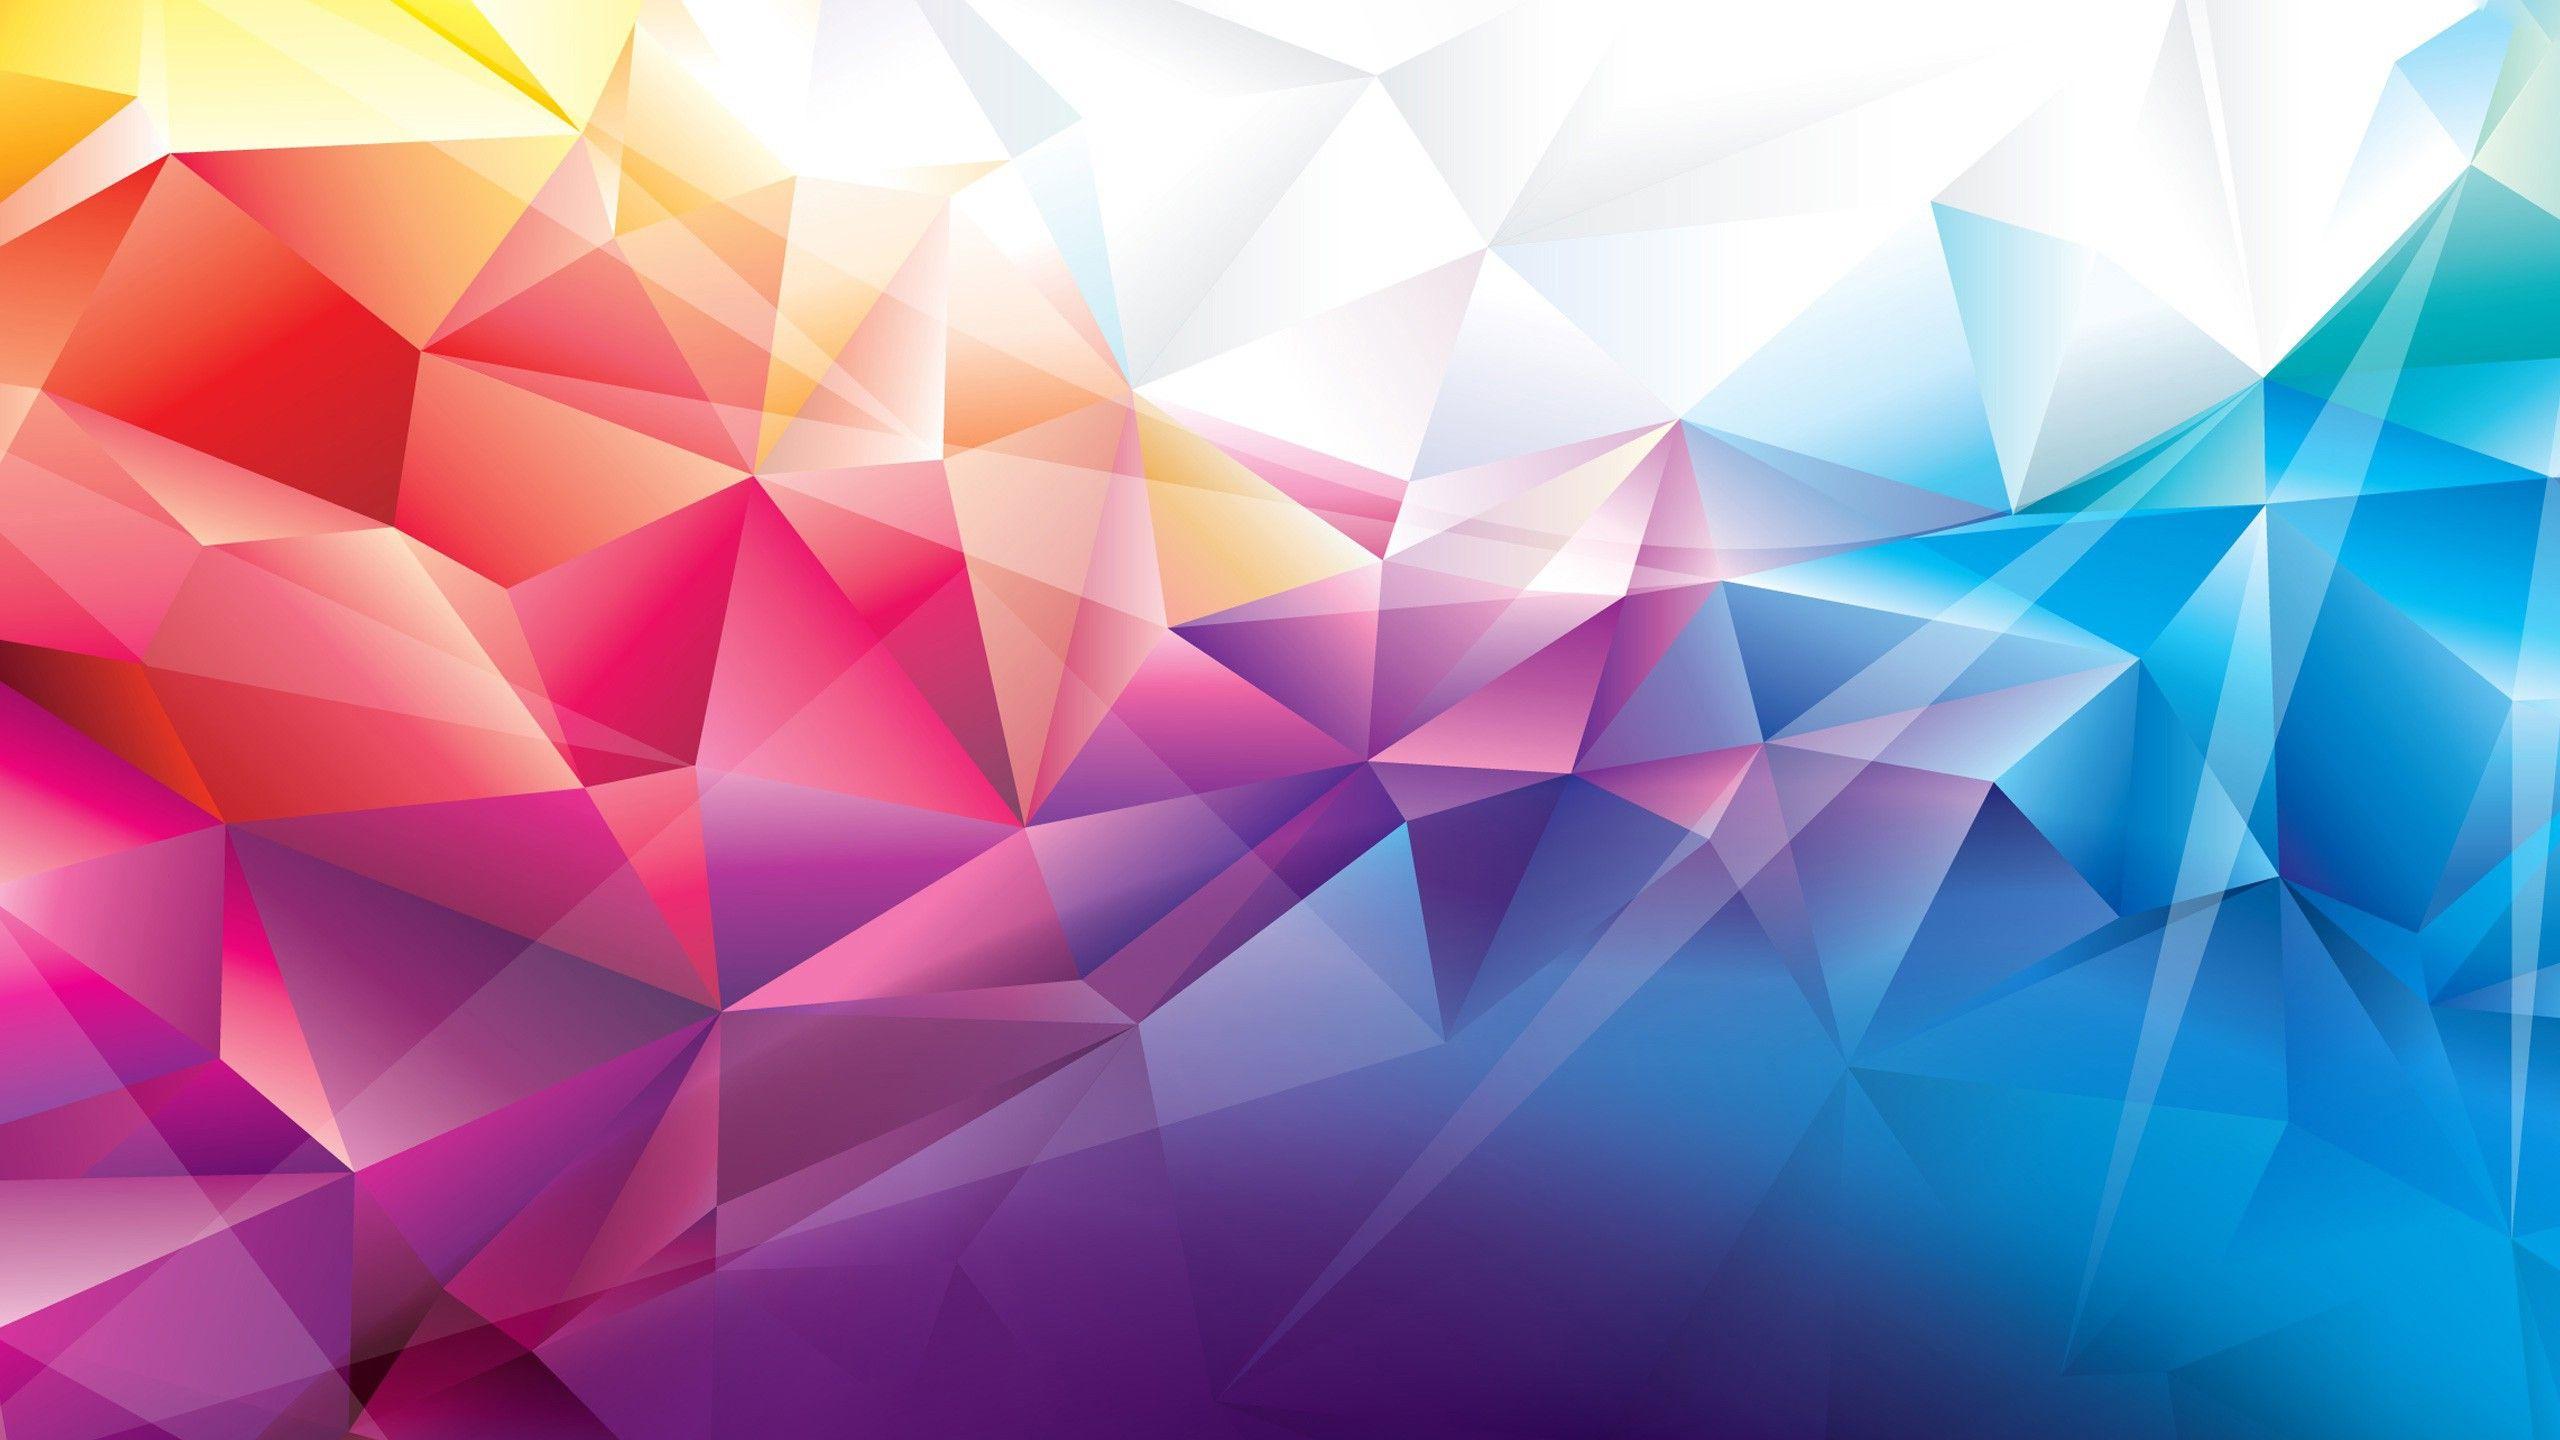 Colorful Polygons Wallpaper. HD Wallpaper. Abstract, 3D